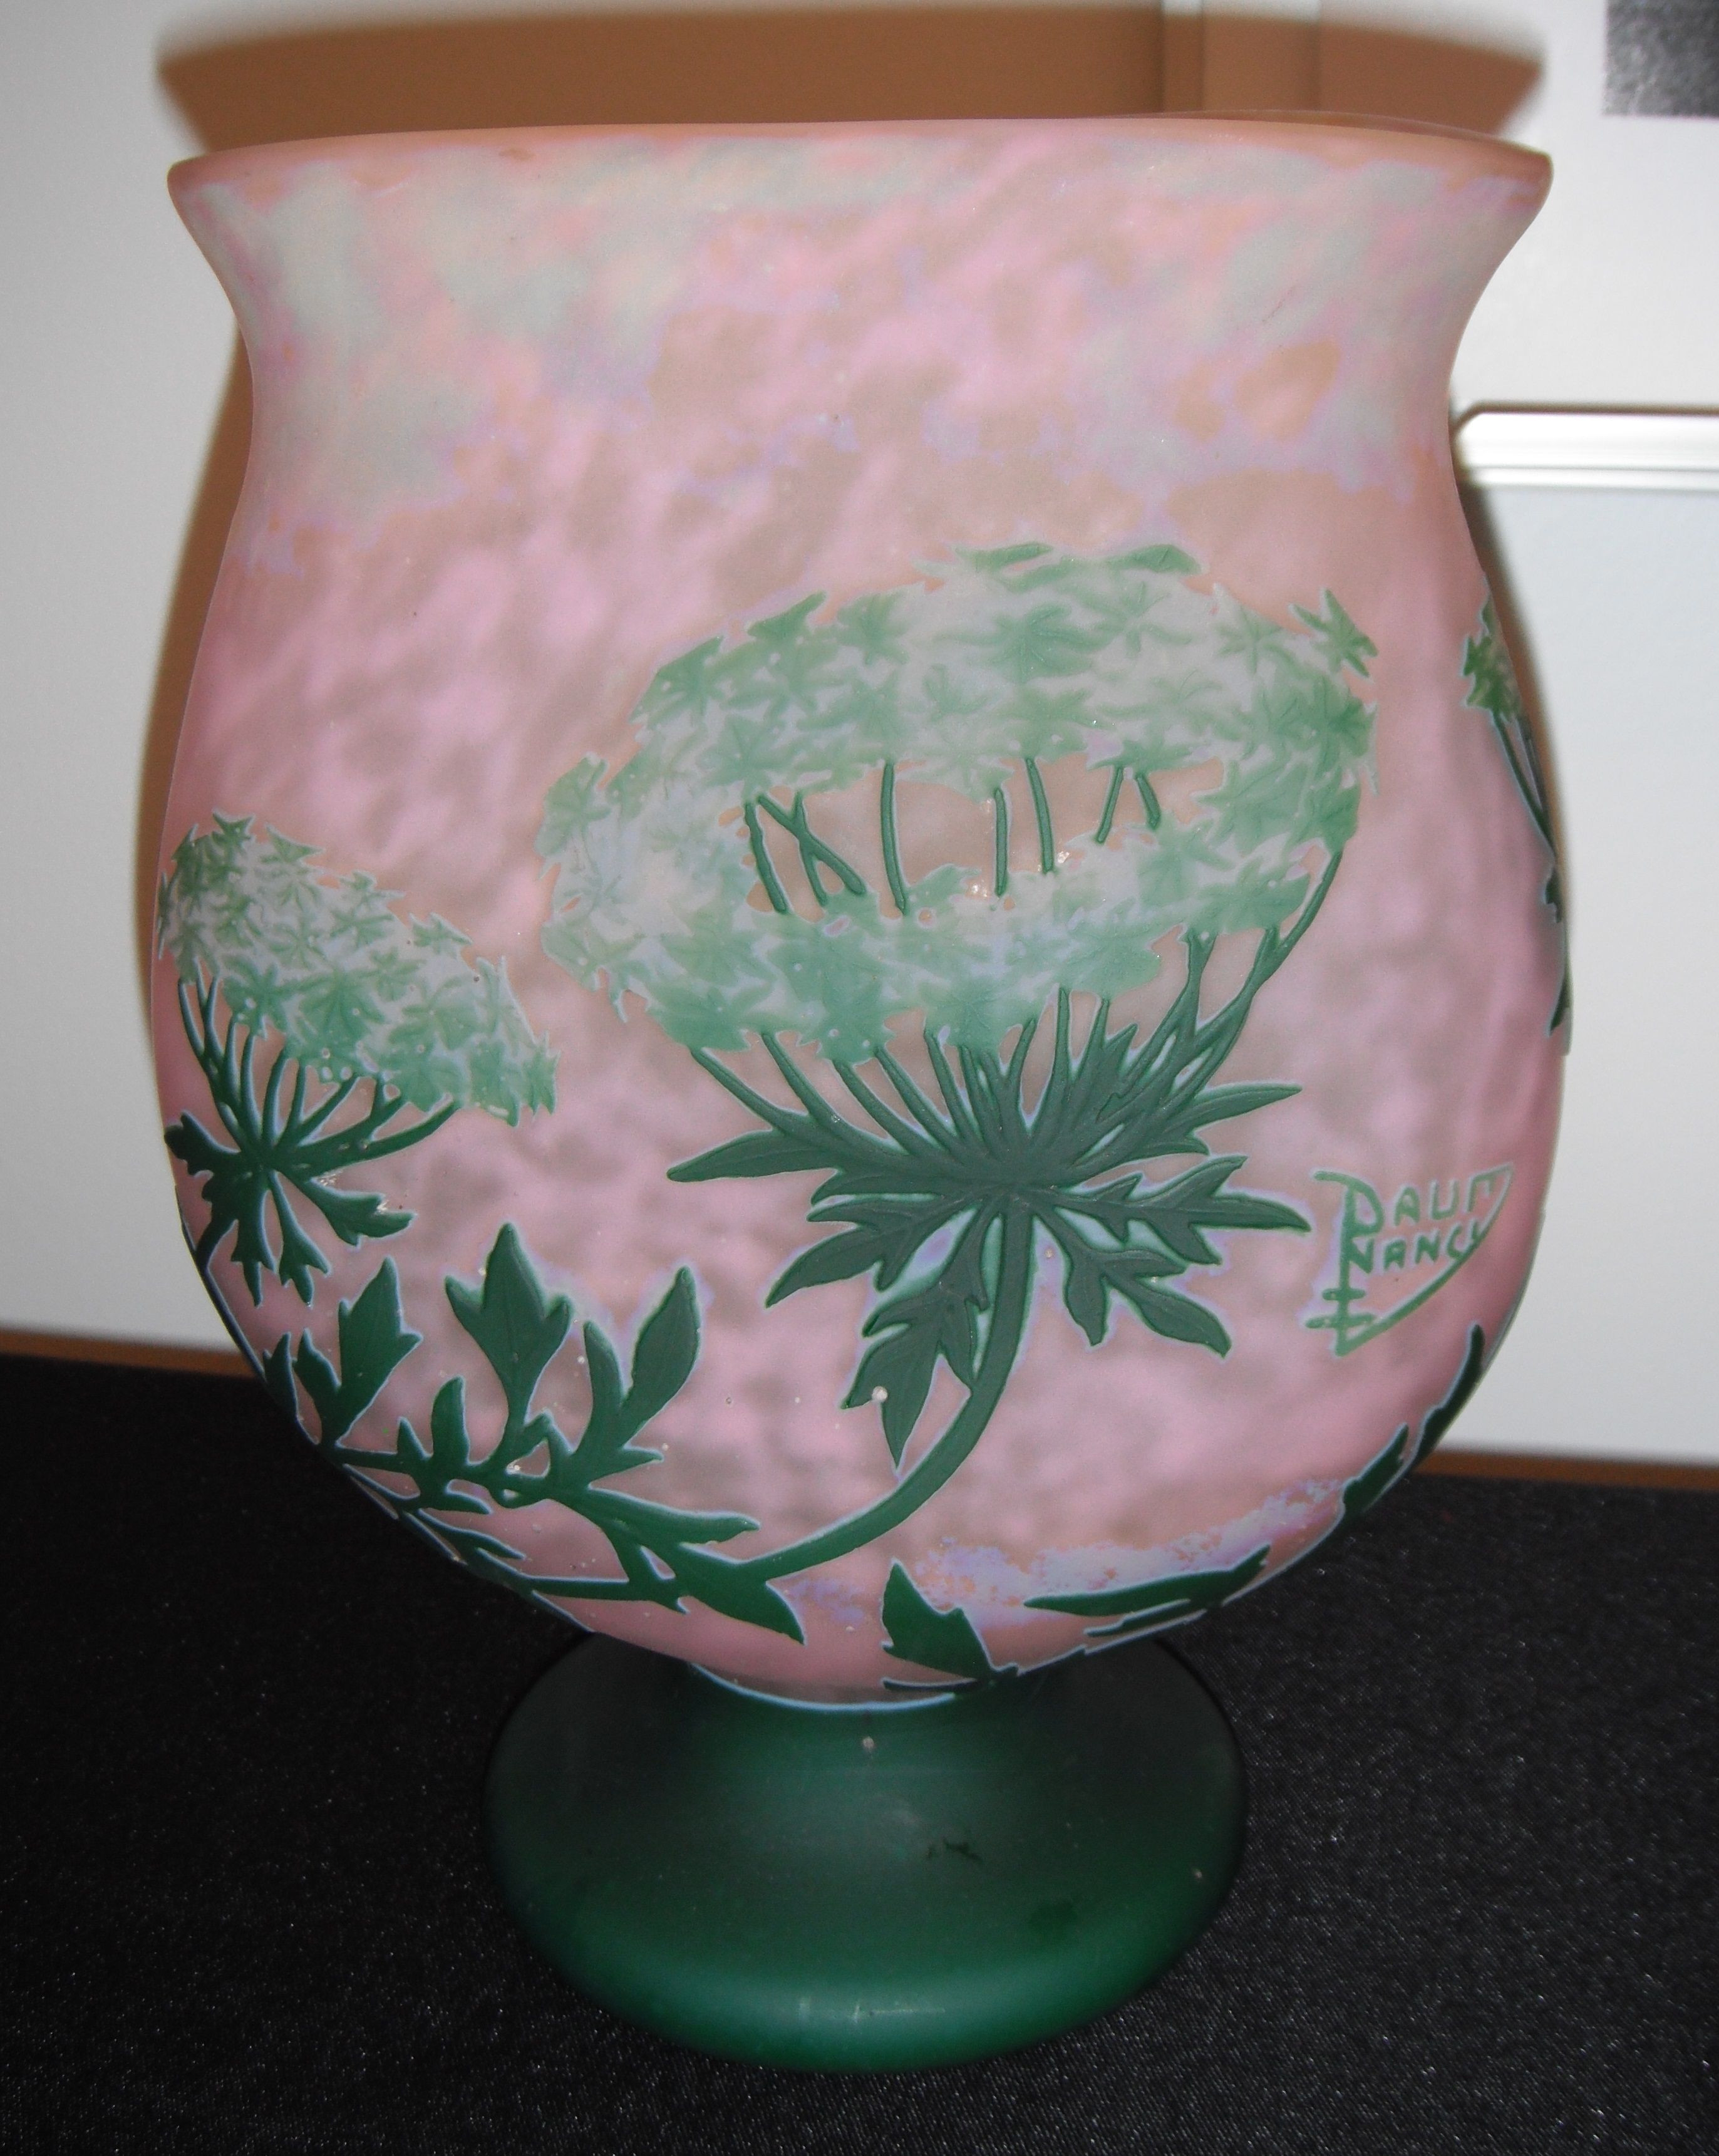 baccarat vase ebay of french daum nancy glass vase dr loris antiques finds from ohio within french daum nancy glass vase